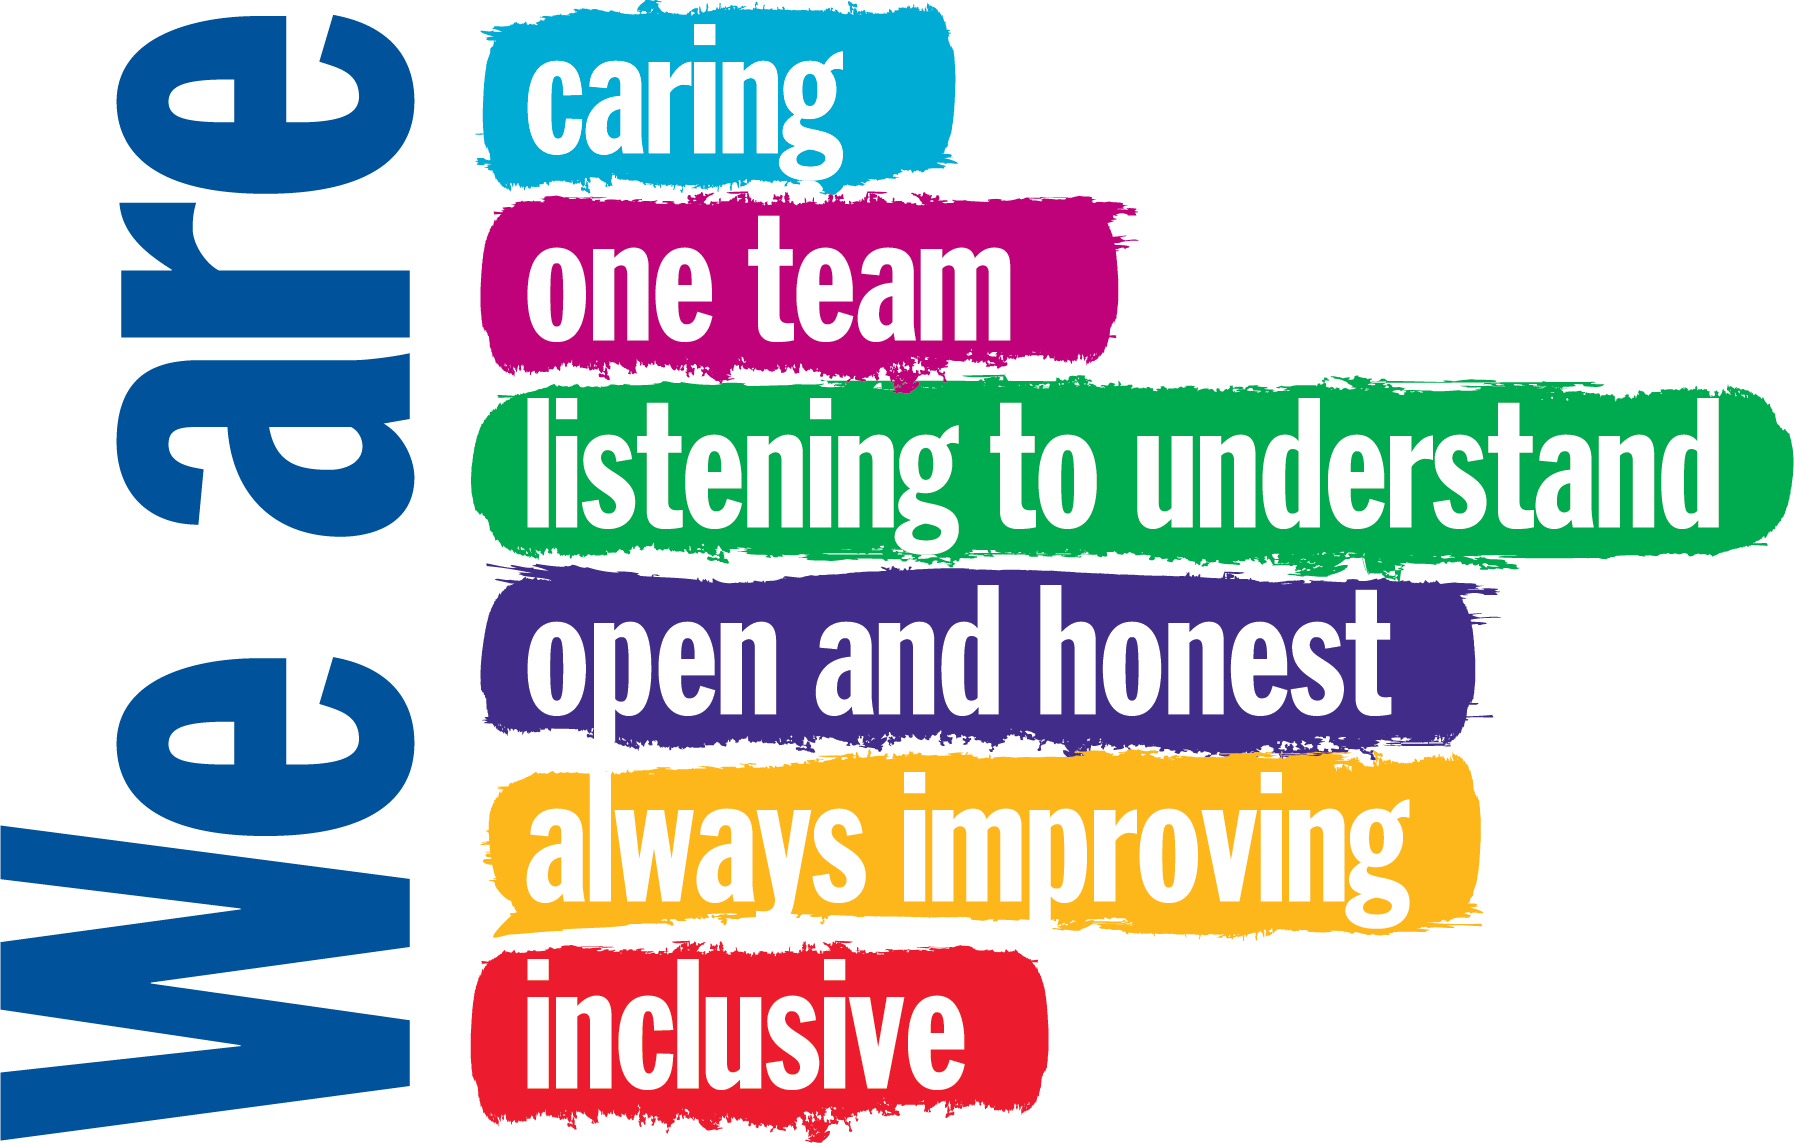 Our trust values